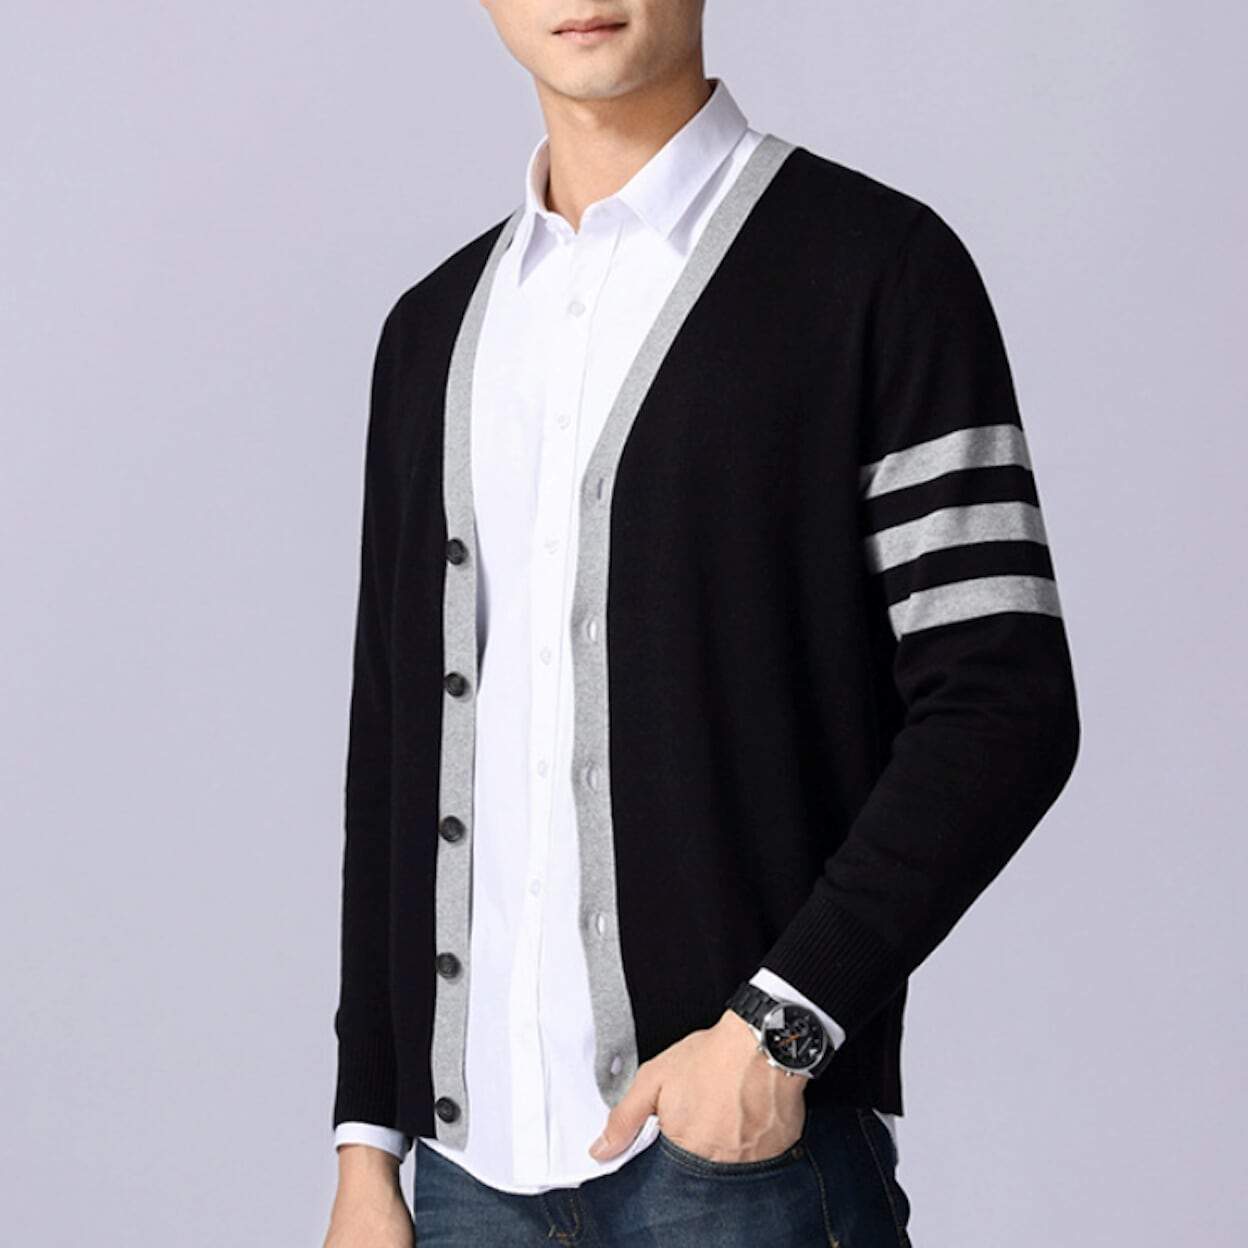 Mens Button Front Cardigan with Sleeve Details